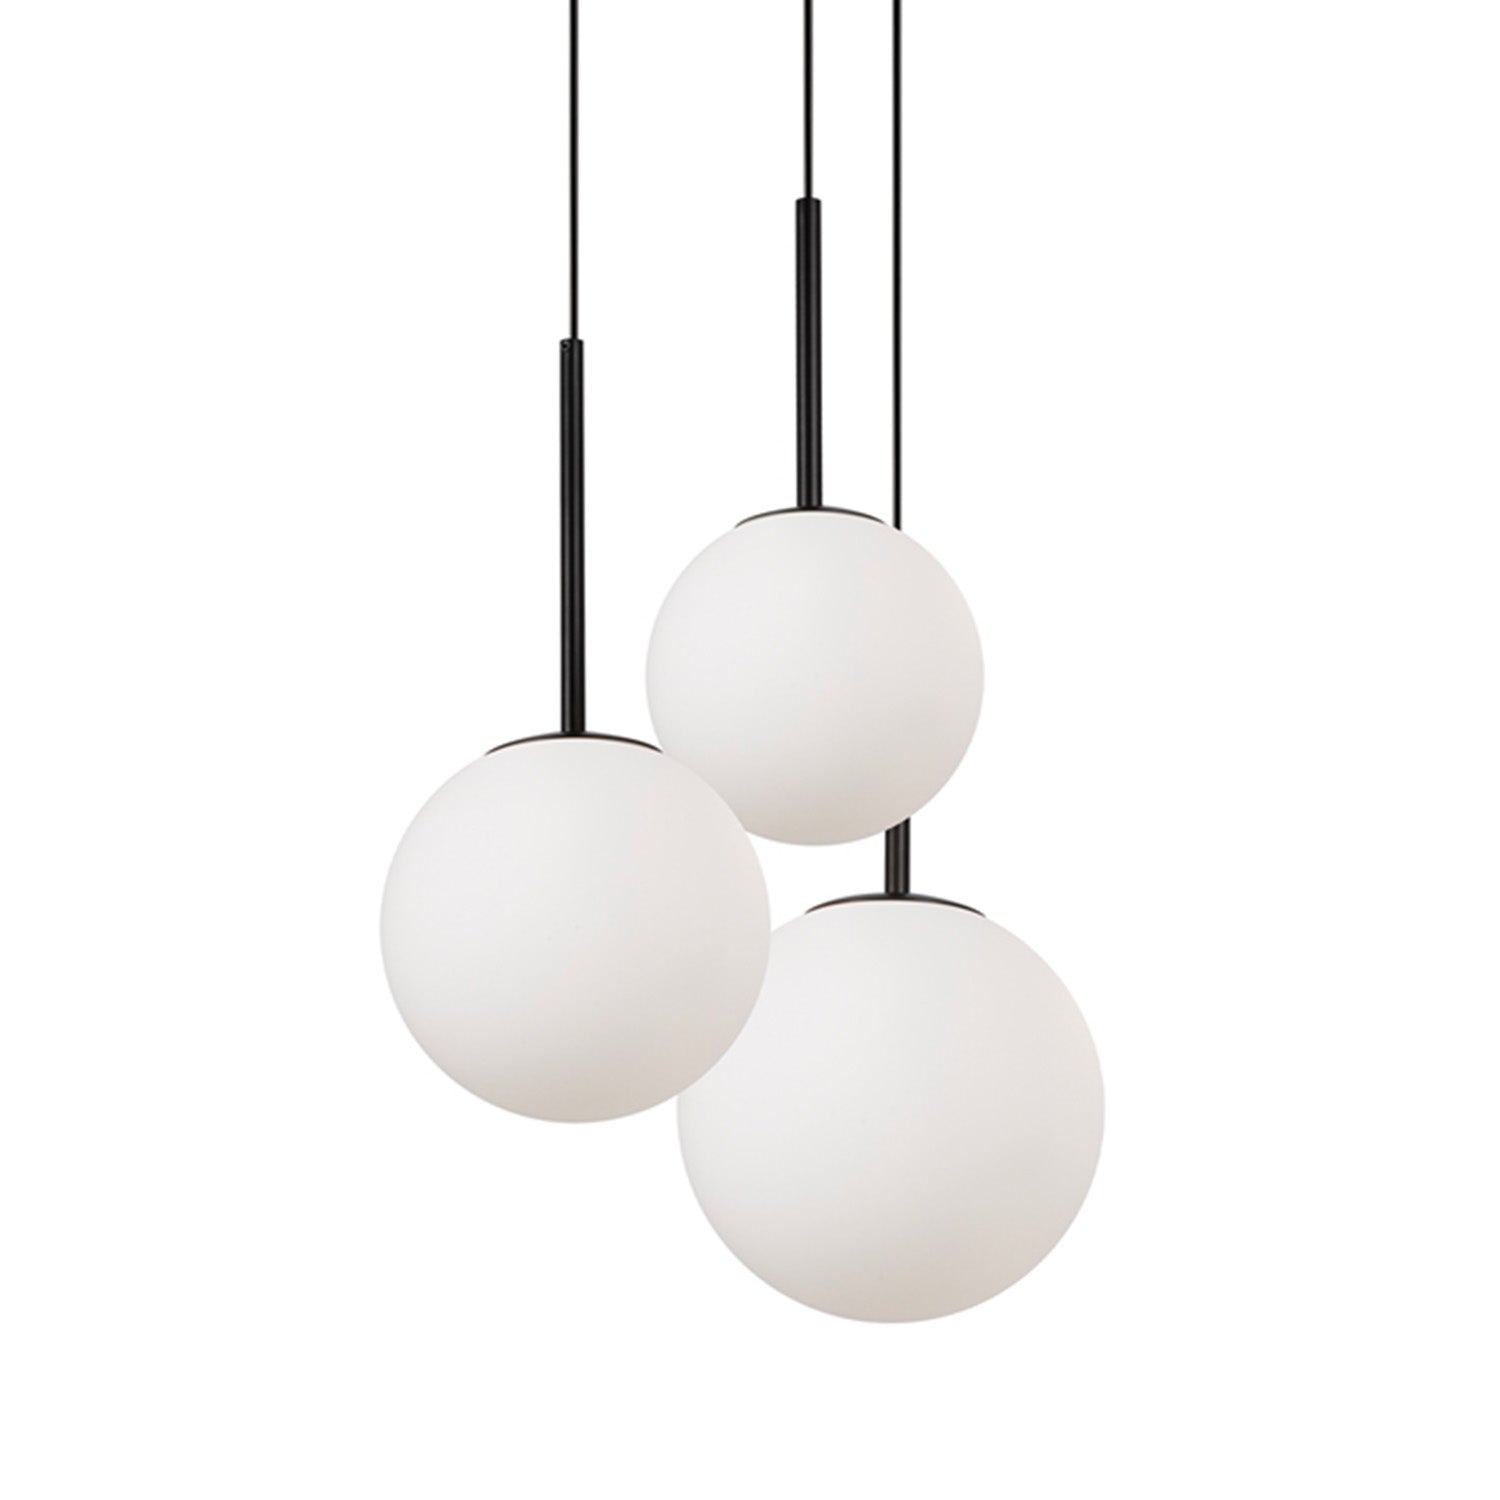 BASIC FORM 3 - Gold, black or white pendant light and opaque glass balls